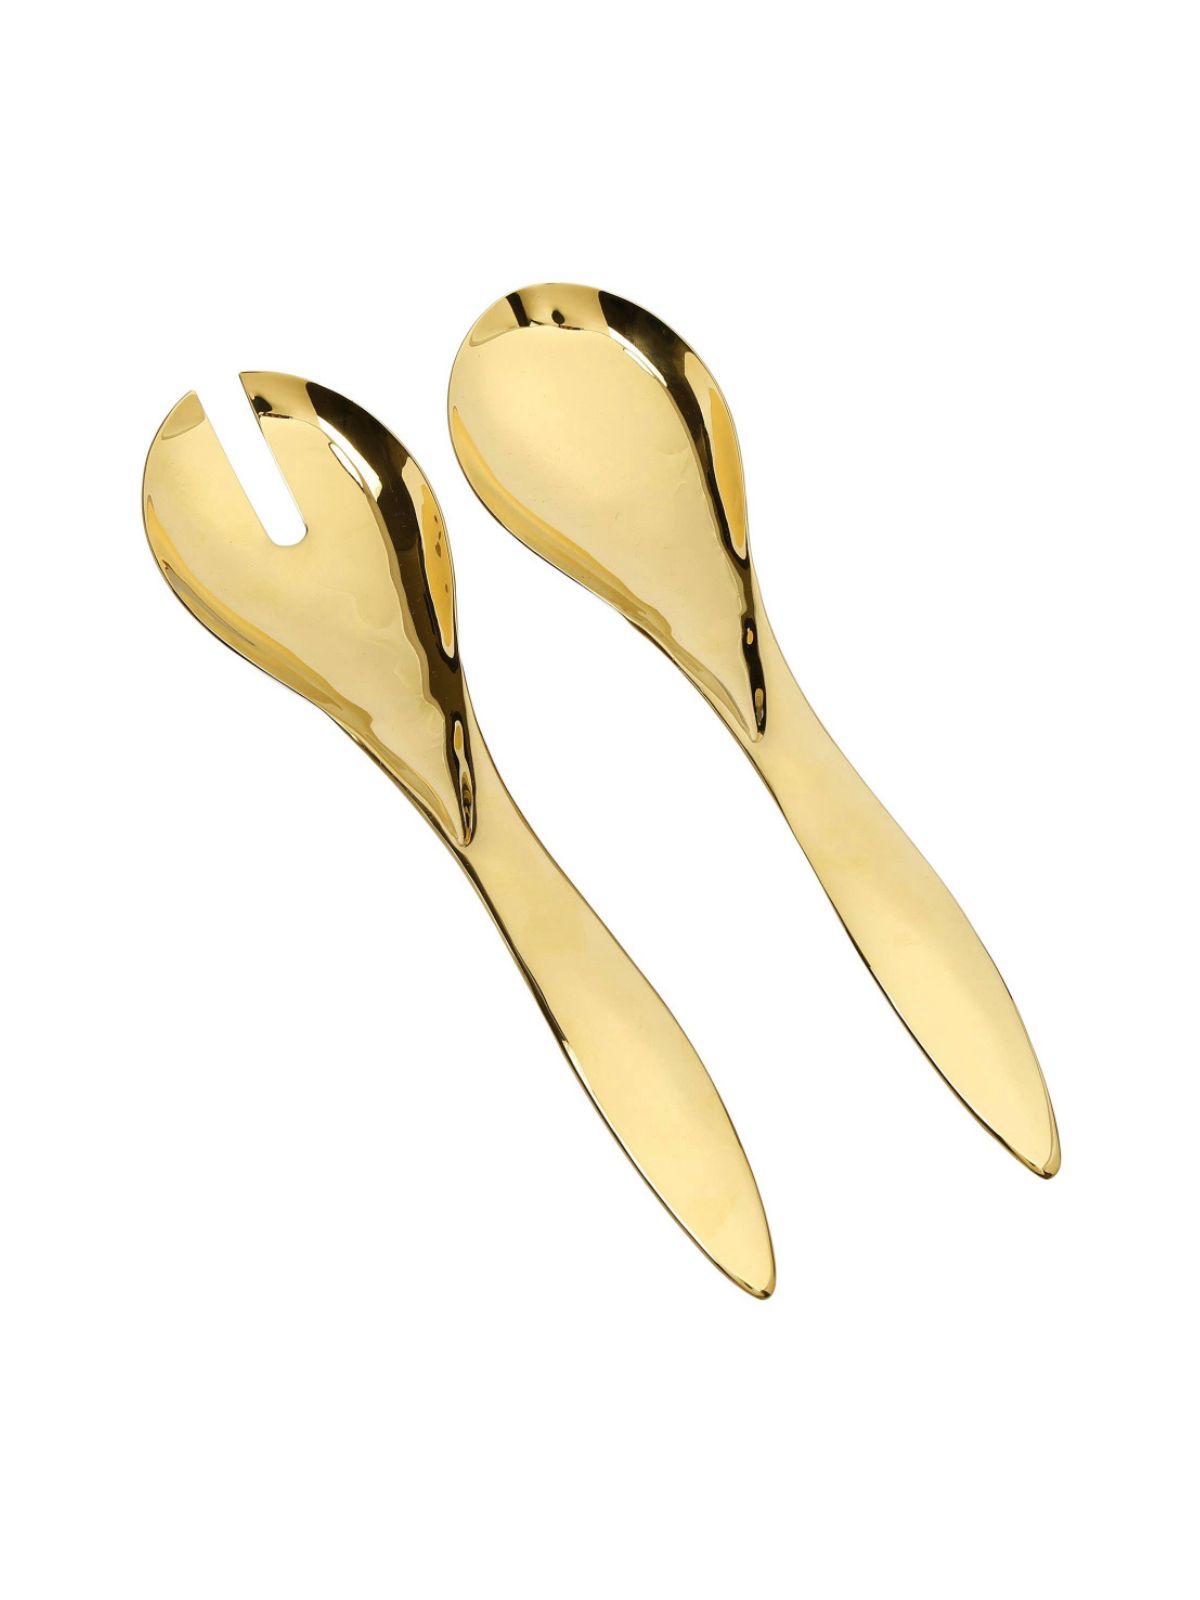 This stainless steel  salad server set will definitely add beauty to your serving decor which features an elegant lustrous shiny gold color finish in size 12L available at KYA Home Decor